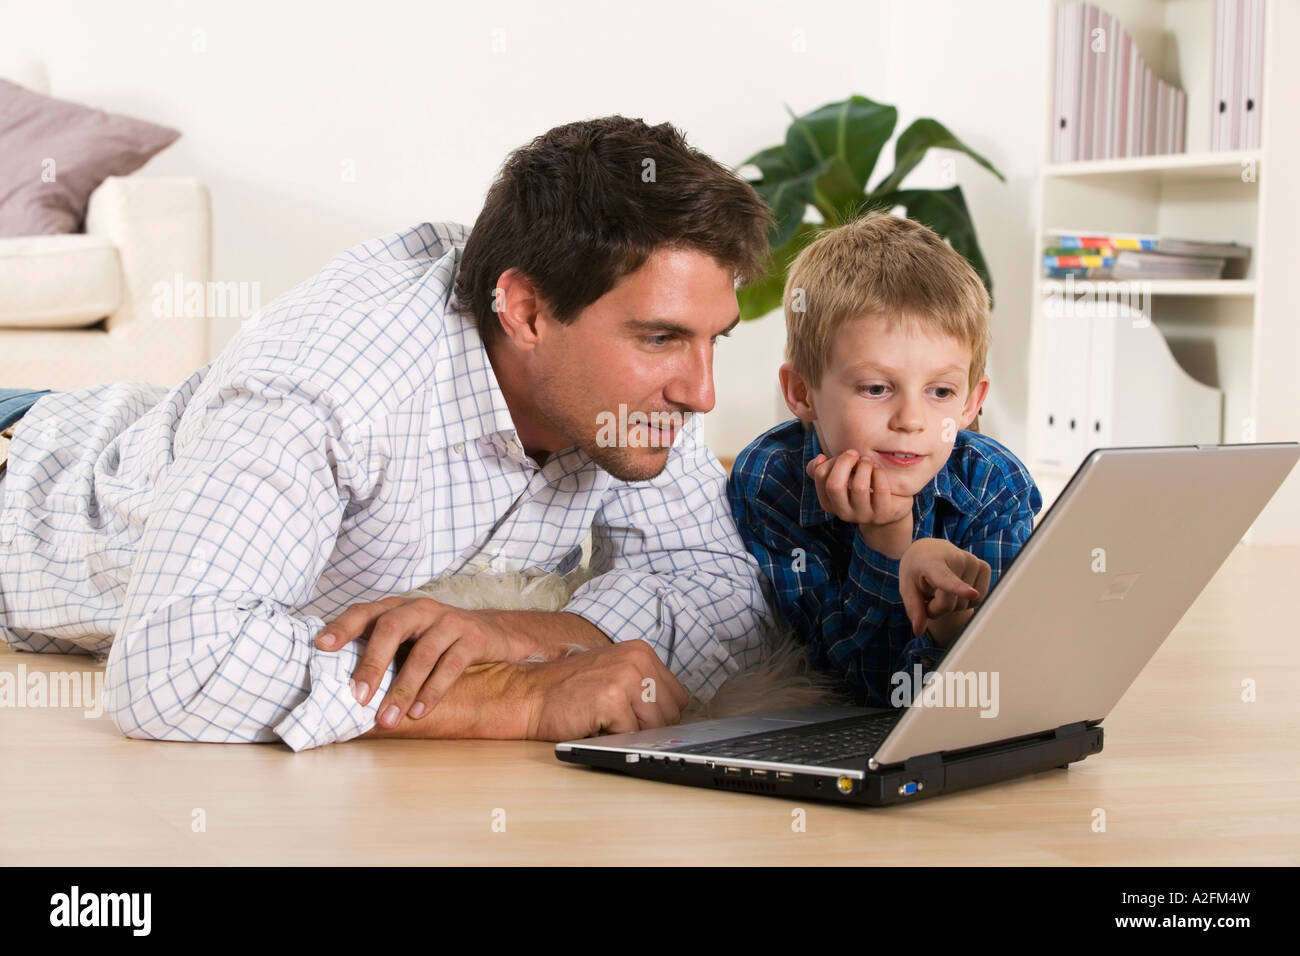 Father and son (6-7) using laptop, close-up Stock Photo